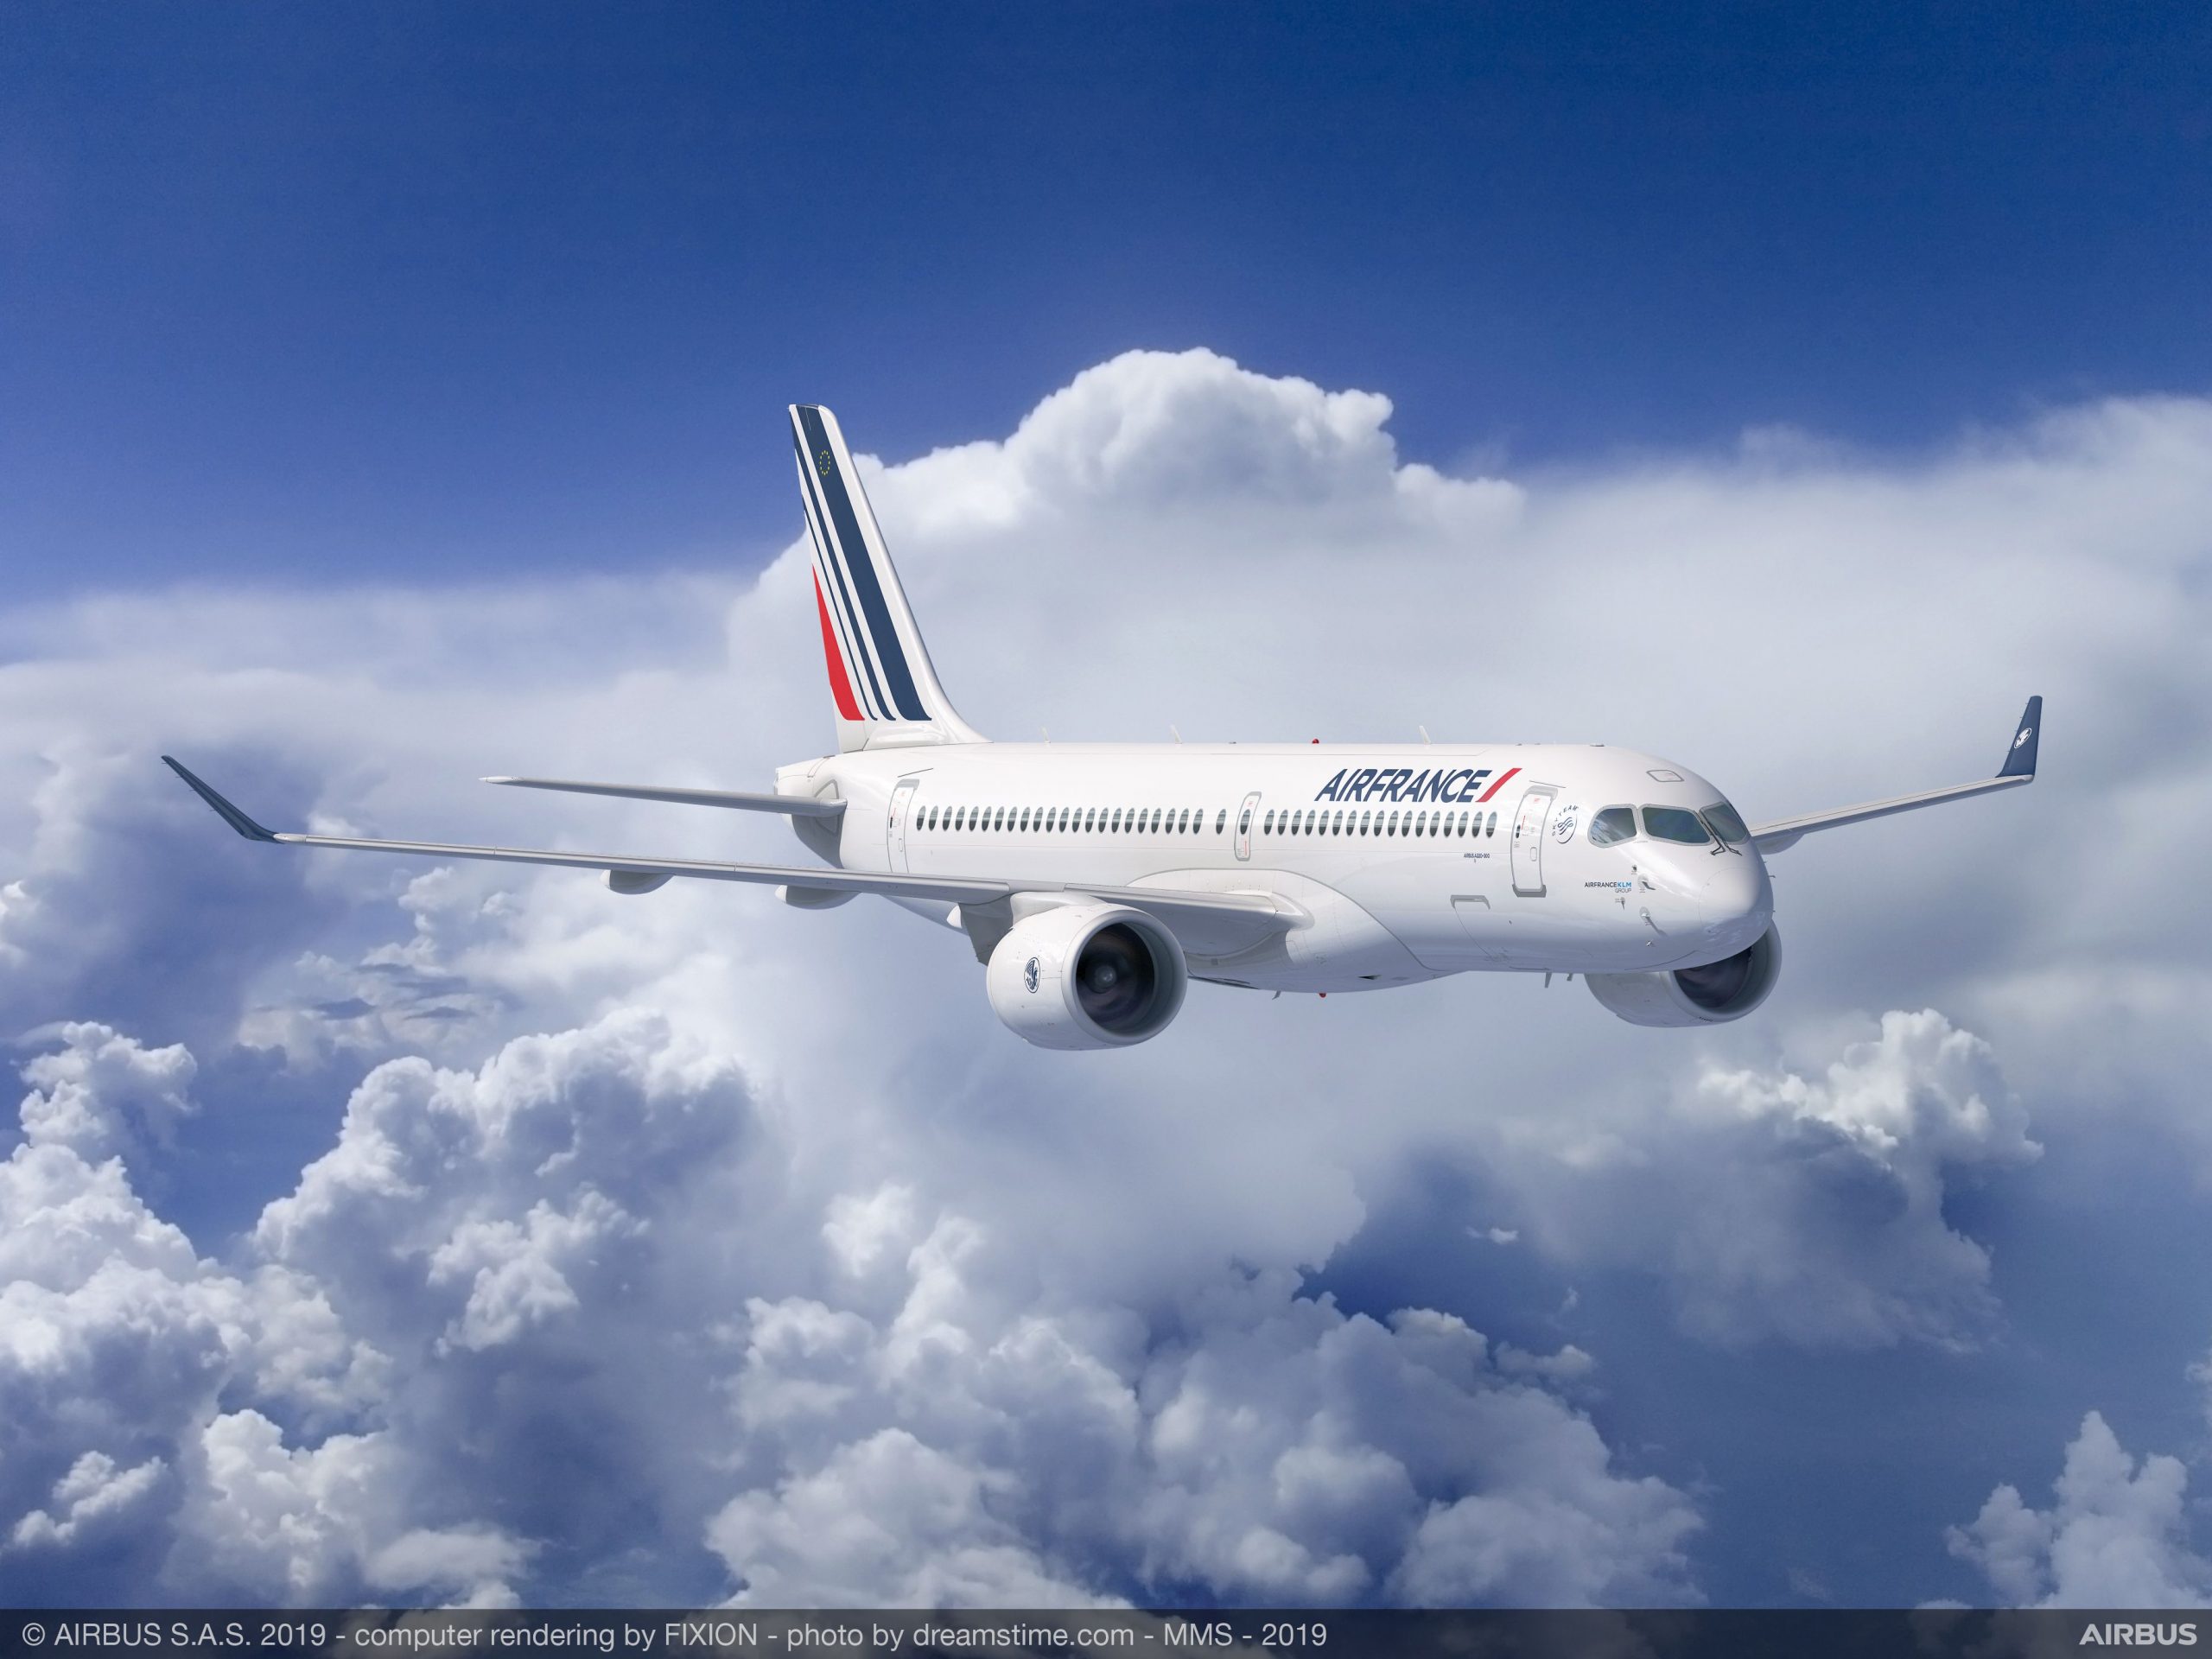 action air france